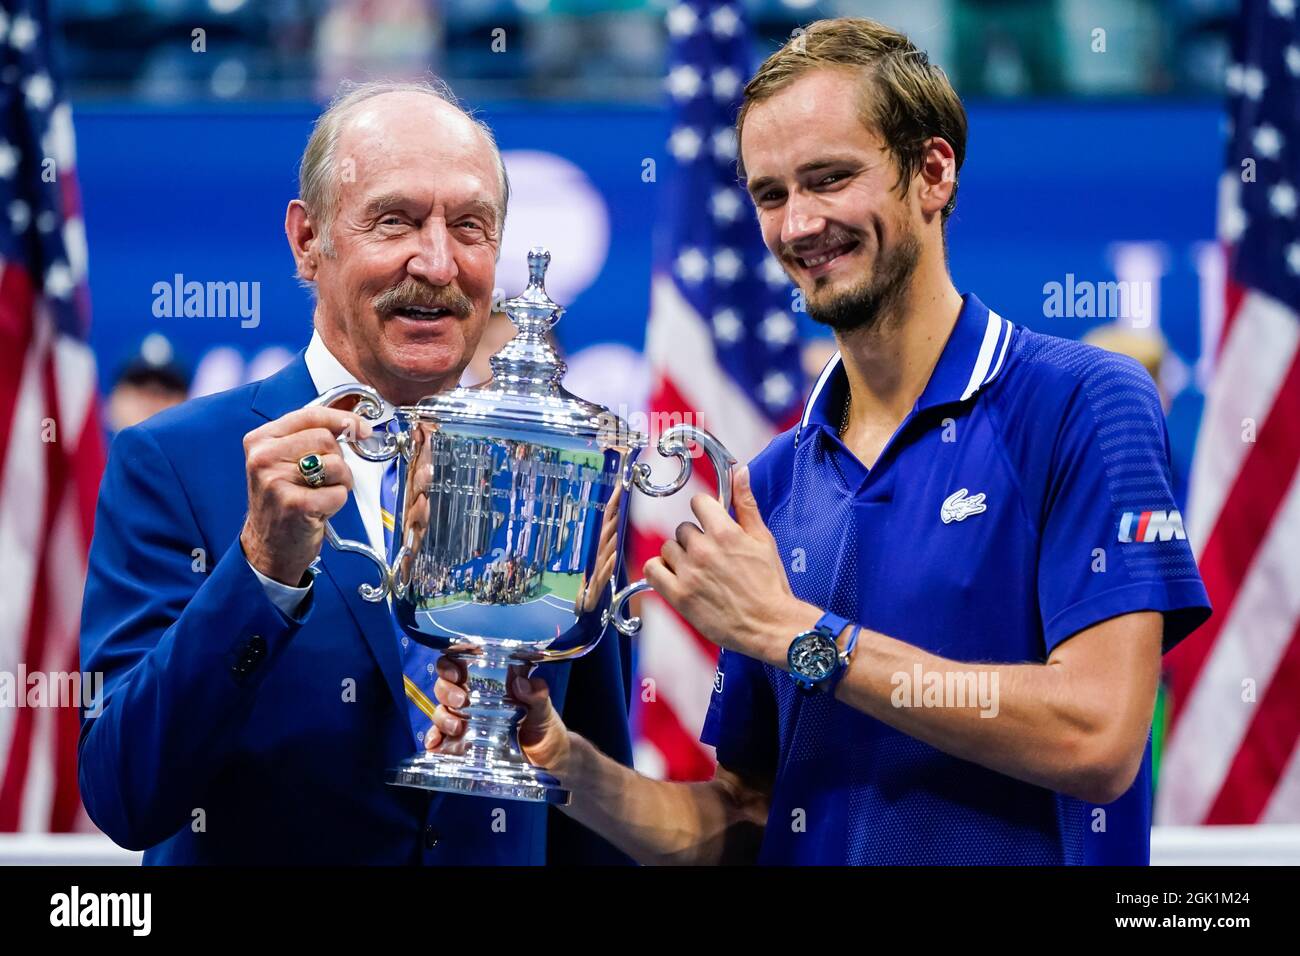 Flushing Meadow, United Stated. 12th Sep, 2021. Former tennis player Stan  Smith and Daniil Medvedev of Russia hold the trophy after his win against  Novak Djokavic of Serbia in the Men's Final